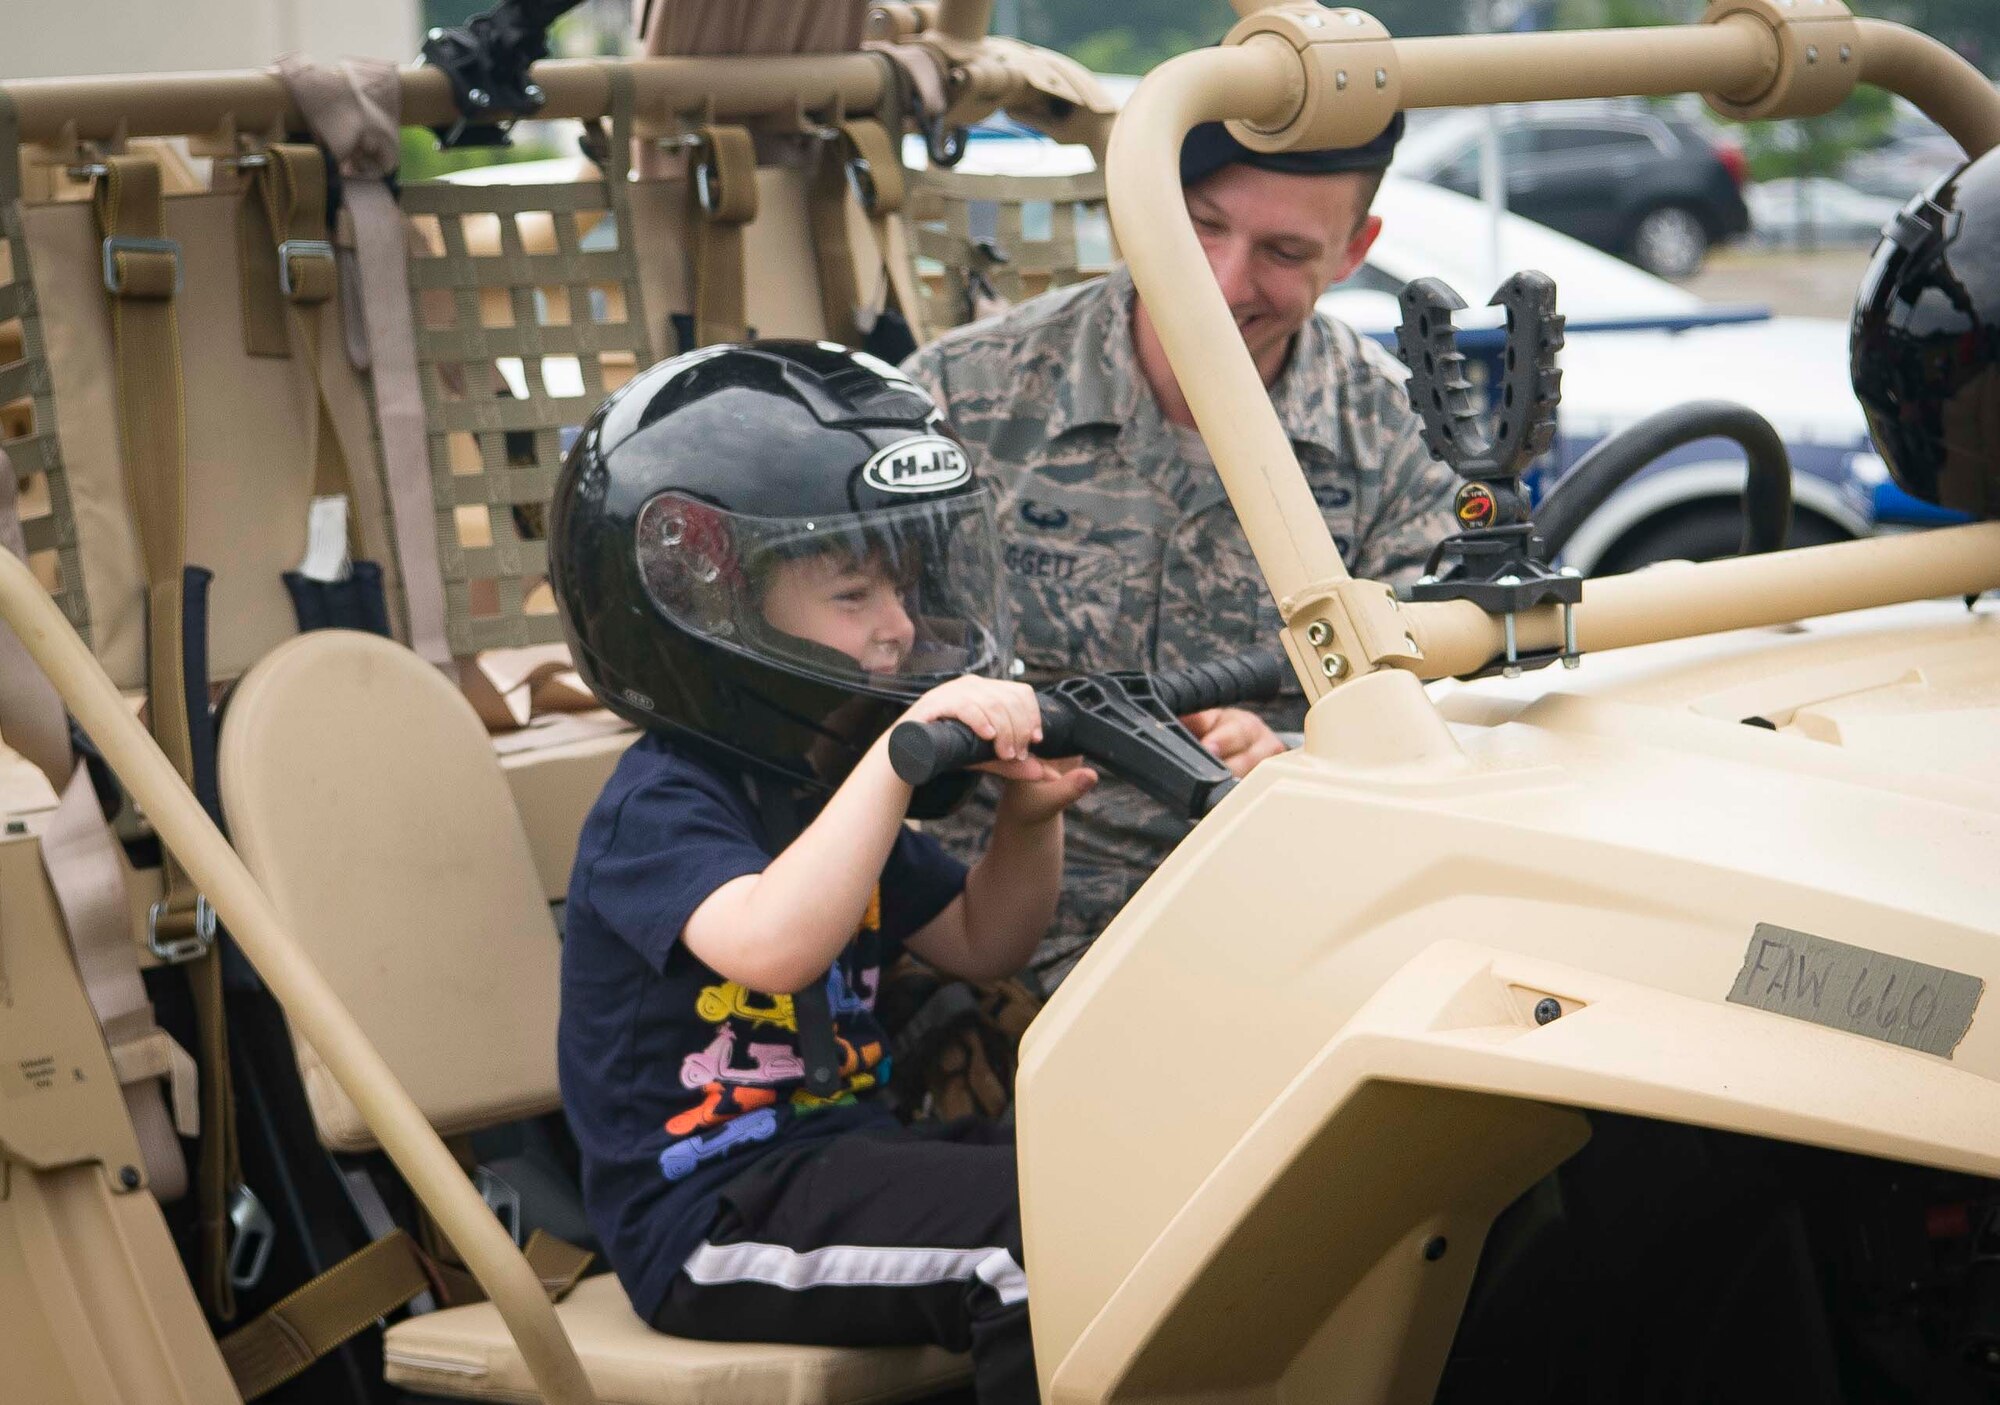 U.S. Air Force Senior Airman Ryan Daggett, 435th Security Forces Squadron contingency response team member, allows a child to sit in a Razor all-terrain vehicle during Police Week 2018 on Ramstein Air Base, Germany, May 14, 2018. The Police Week events were held to involve the entire community, build relationships with the general public, and raise money to go towards organizations that support those law enforcement officers who paid the ultimate sacrifice or survived from a traumatic experience. (U.S. Air Force photo by Senior Airman Elizabeth Baker)